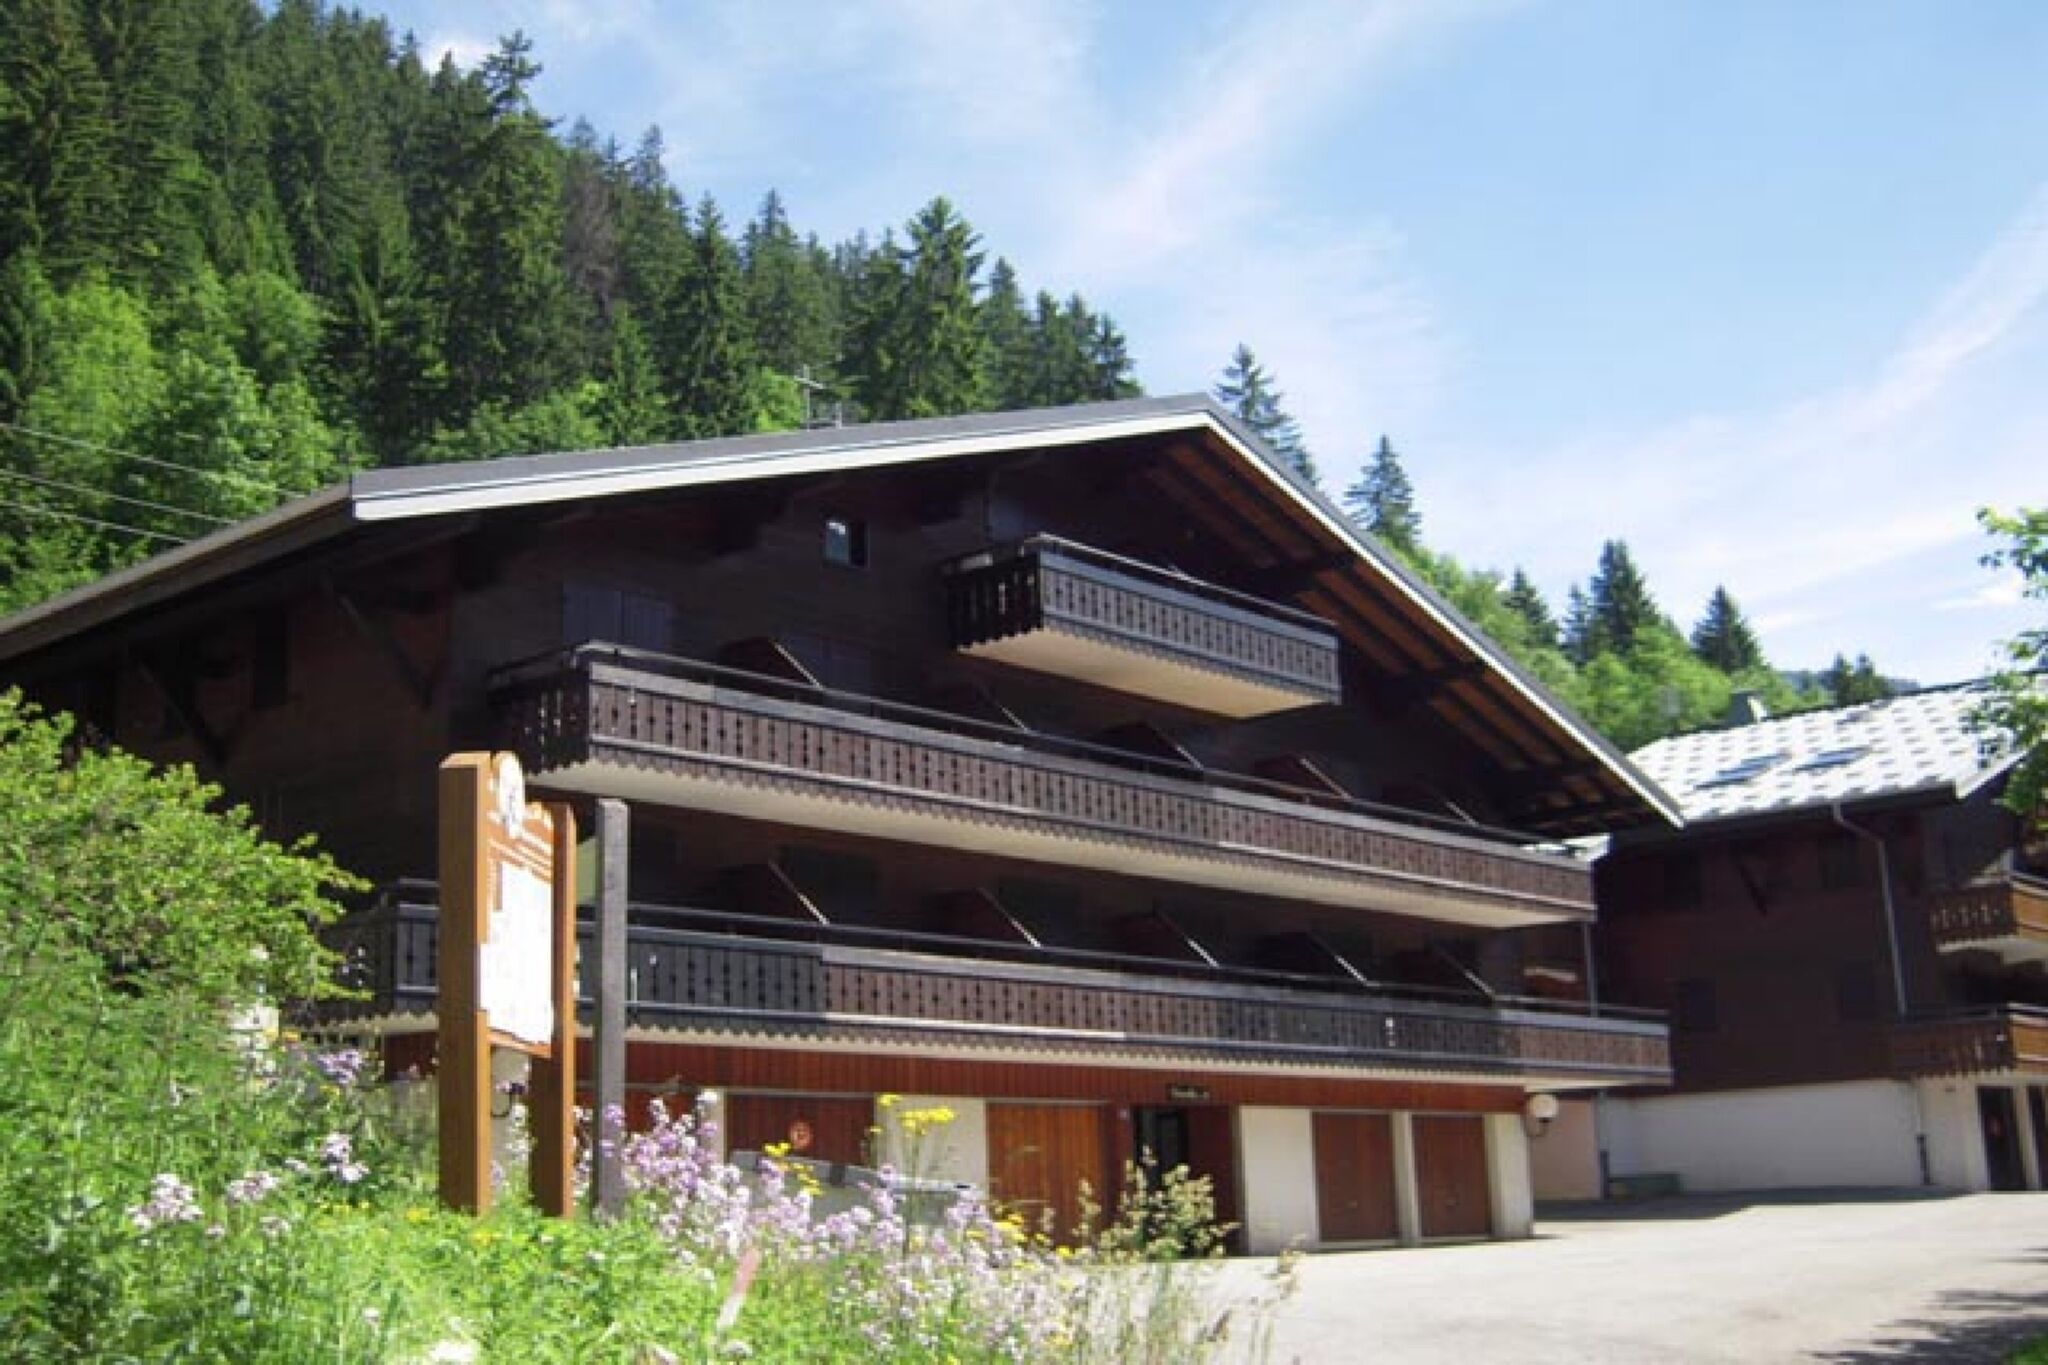 Apartment with balcony located near the ski lifts